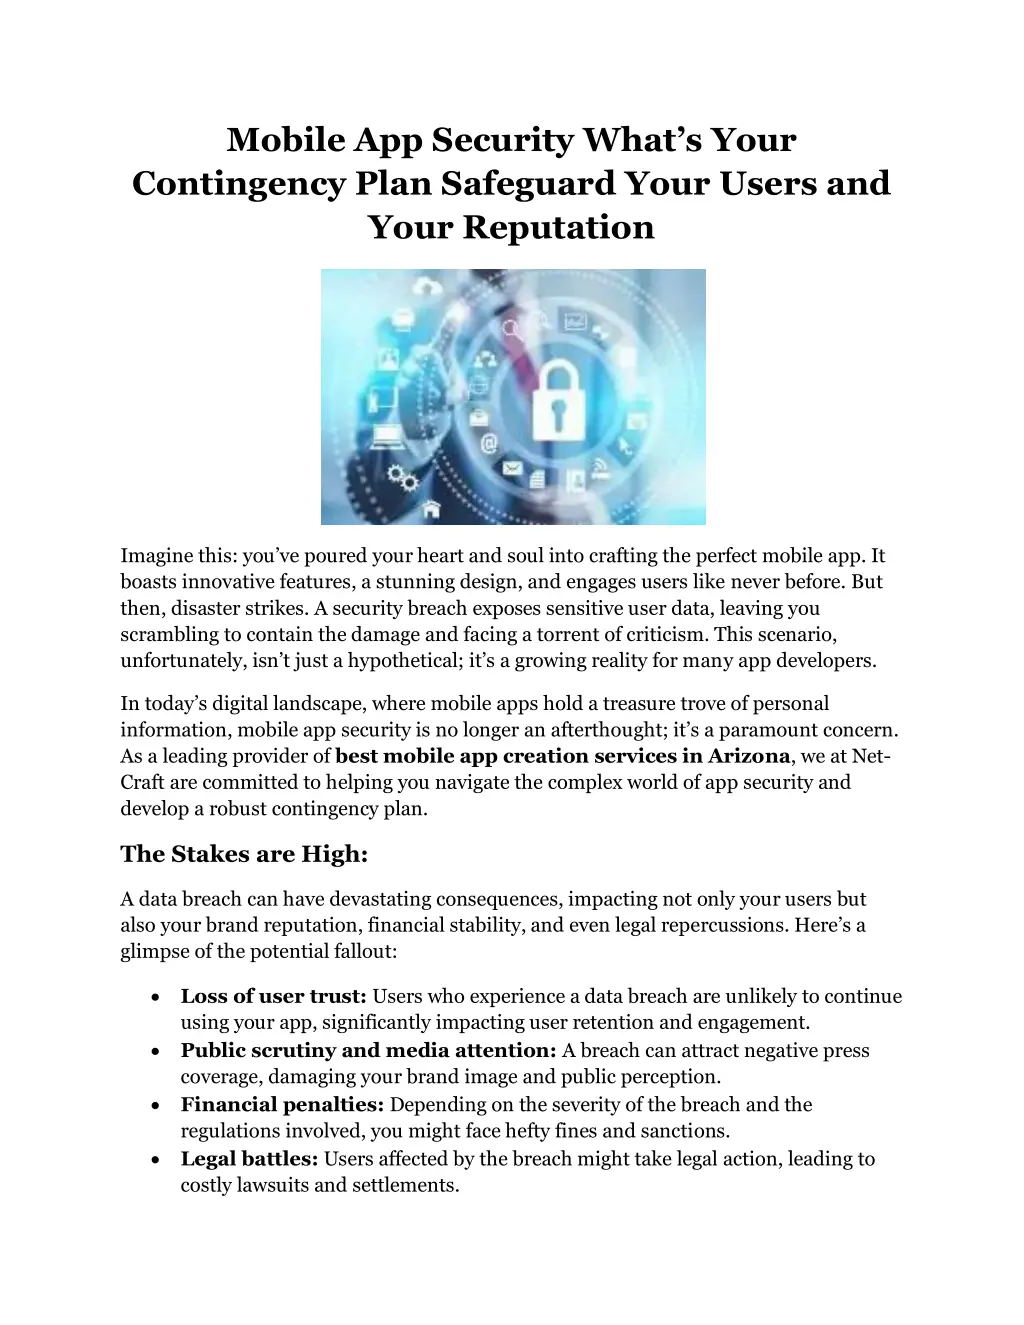 mobile app security what s your contingency plan